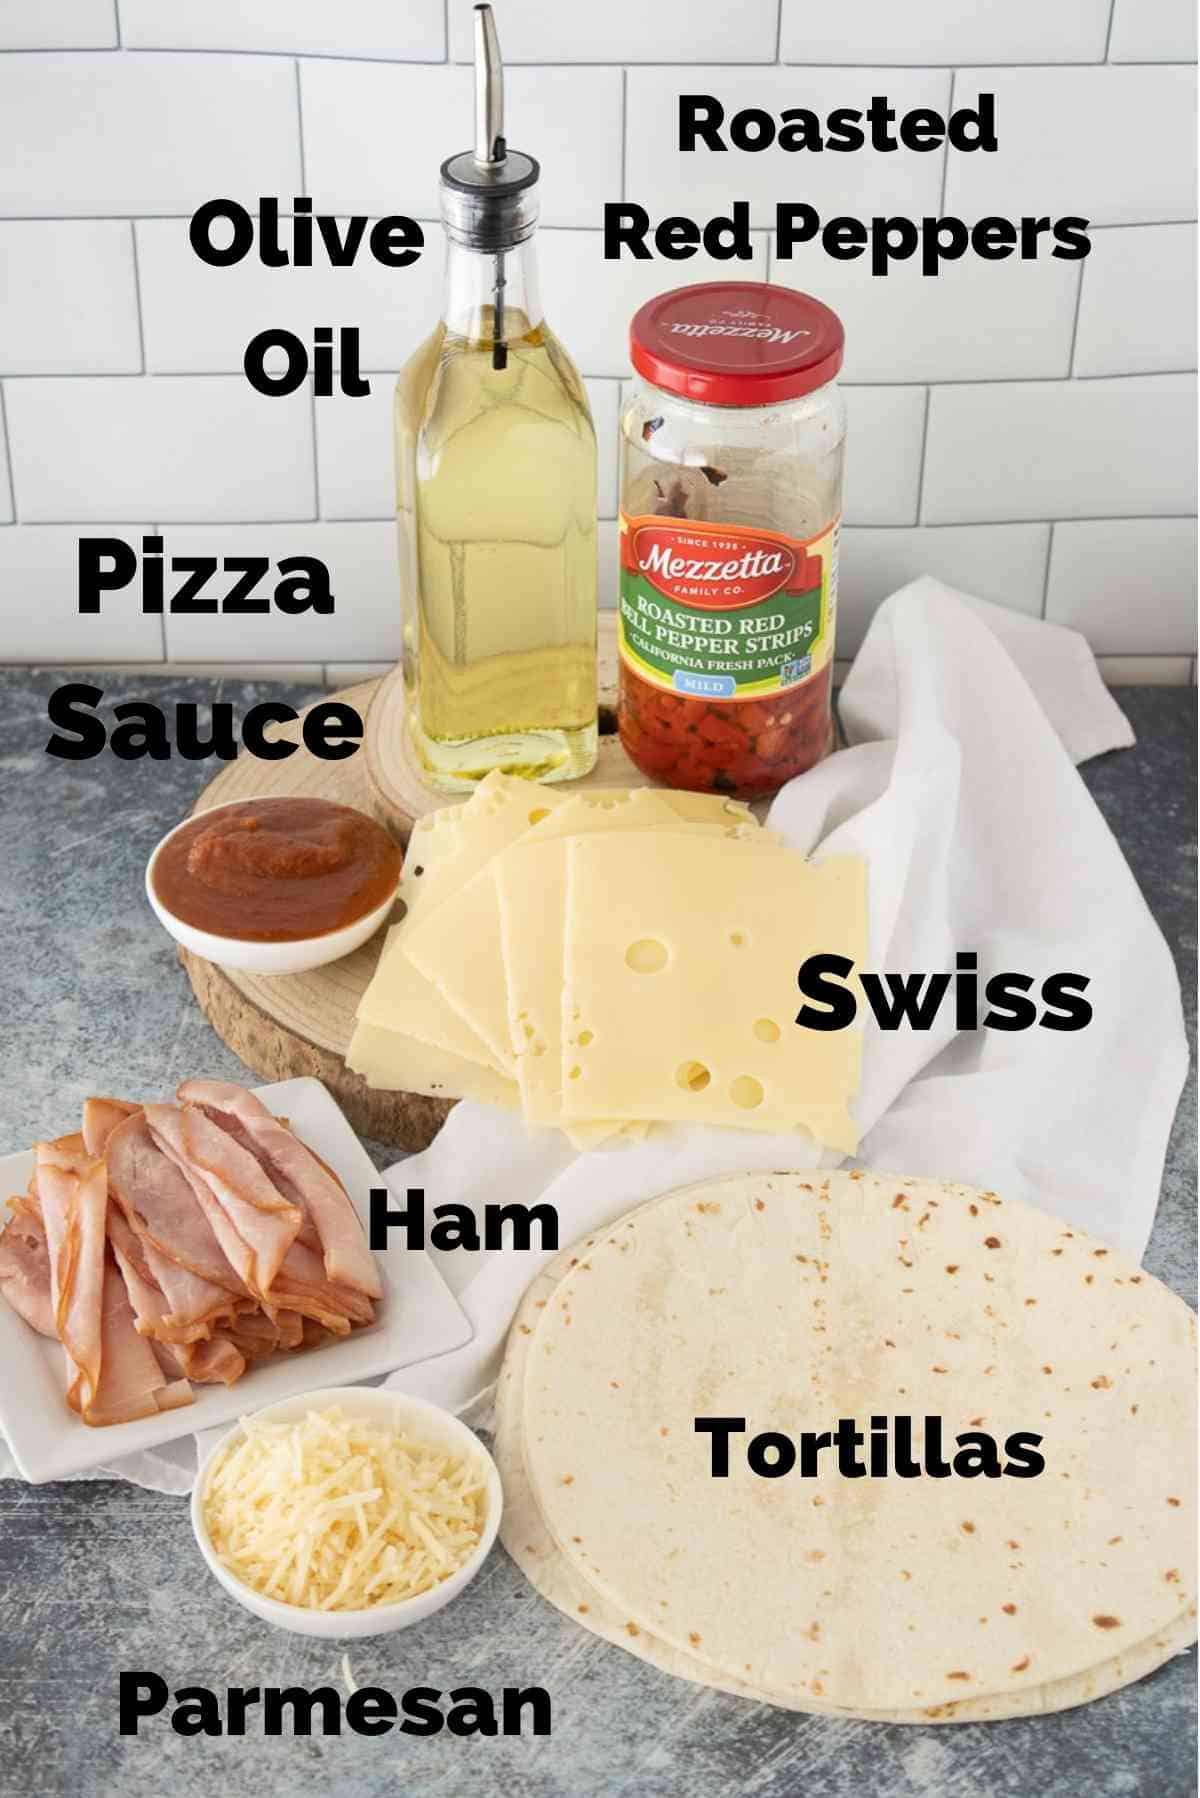 Tortillas, ham, swiss and other ingredients to make ham and cheese roll ups.